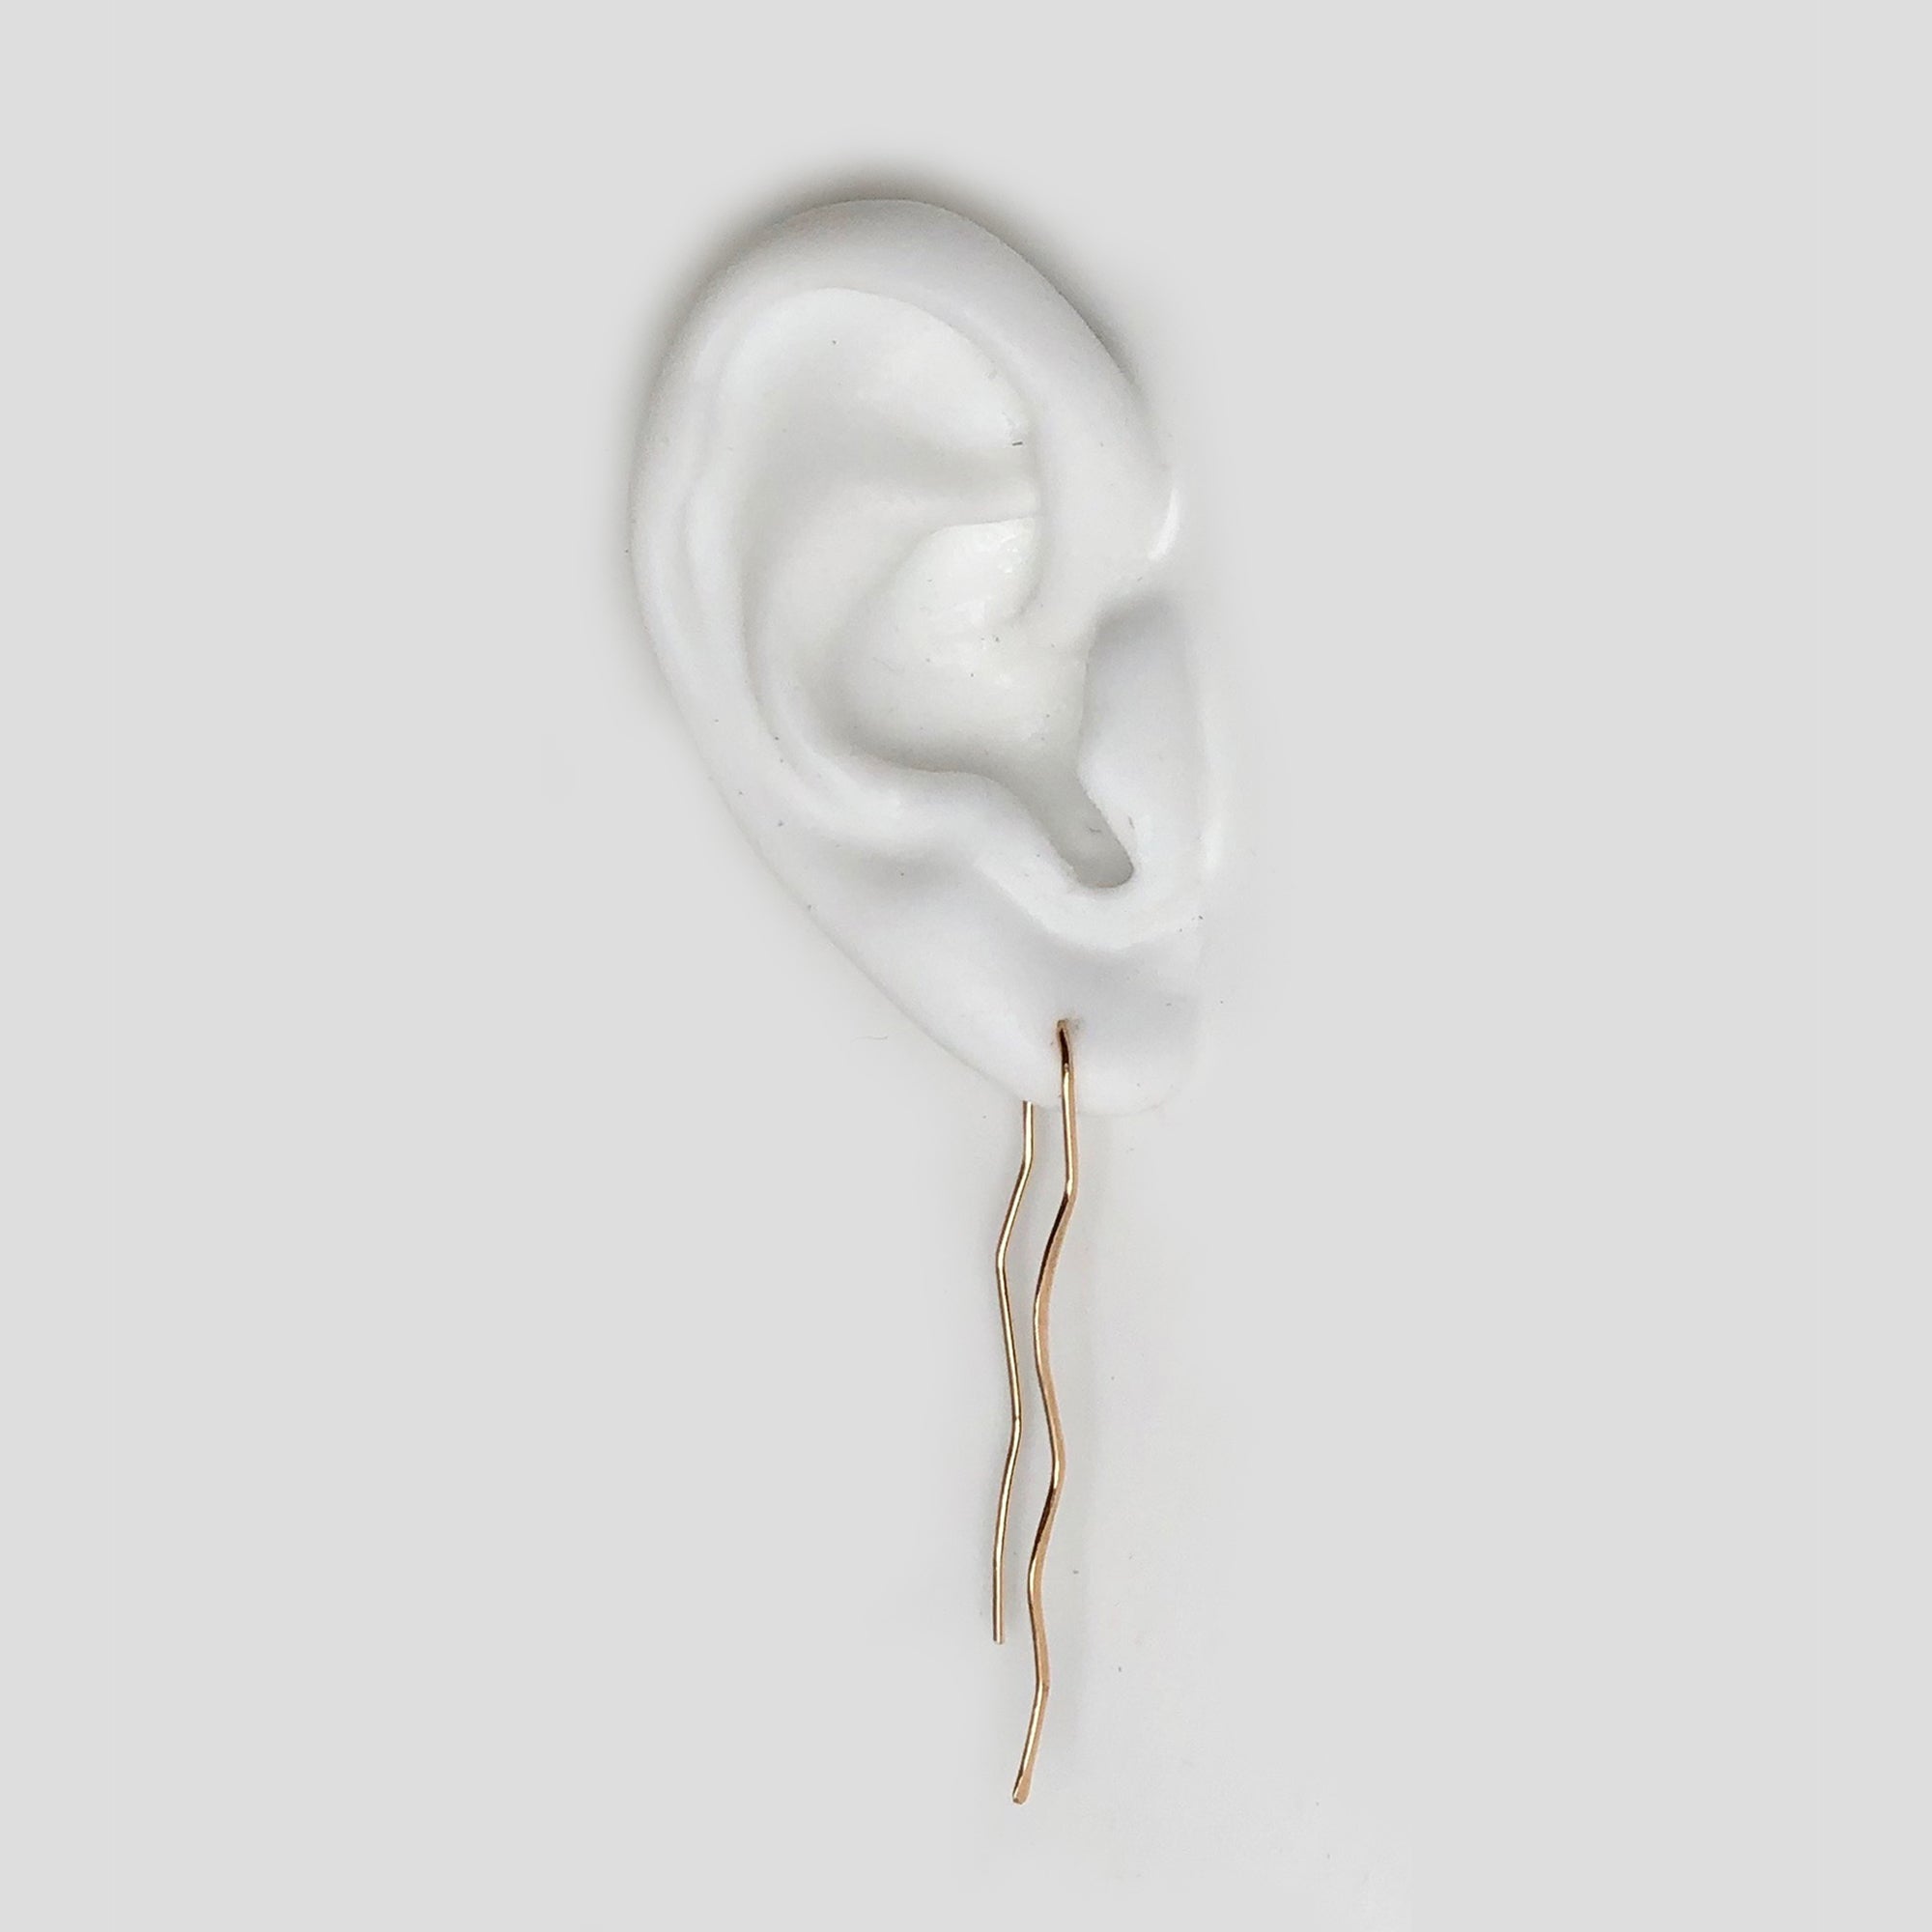 Buttress Hook from our Callen Thompson collab, these lightweight earrings are hand-formed and hammered from 14k gold wire.